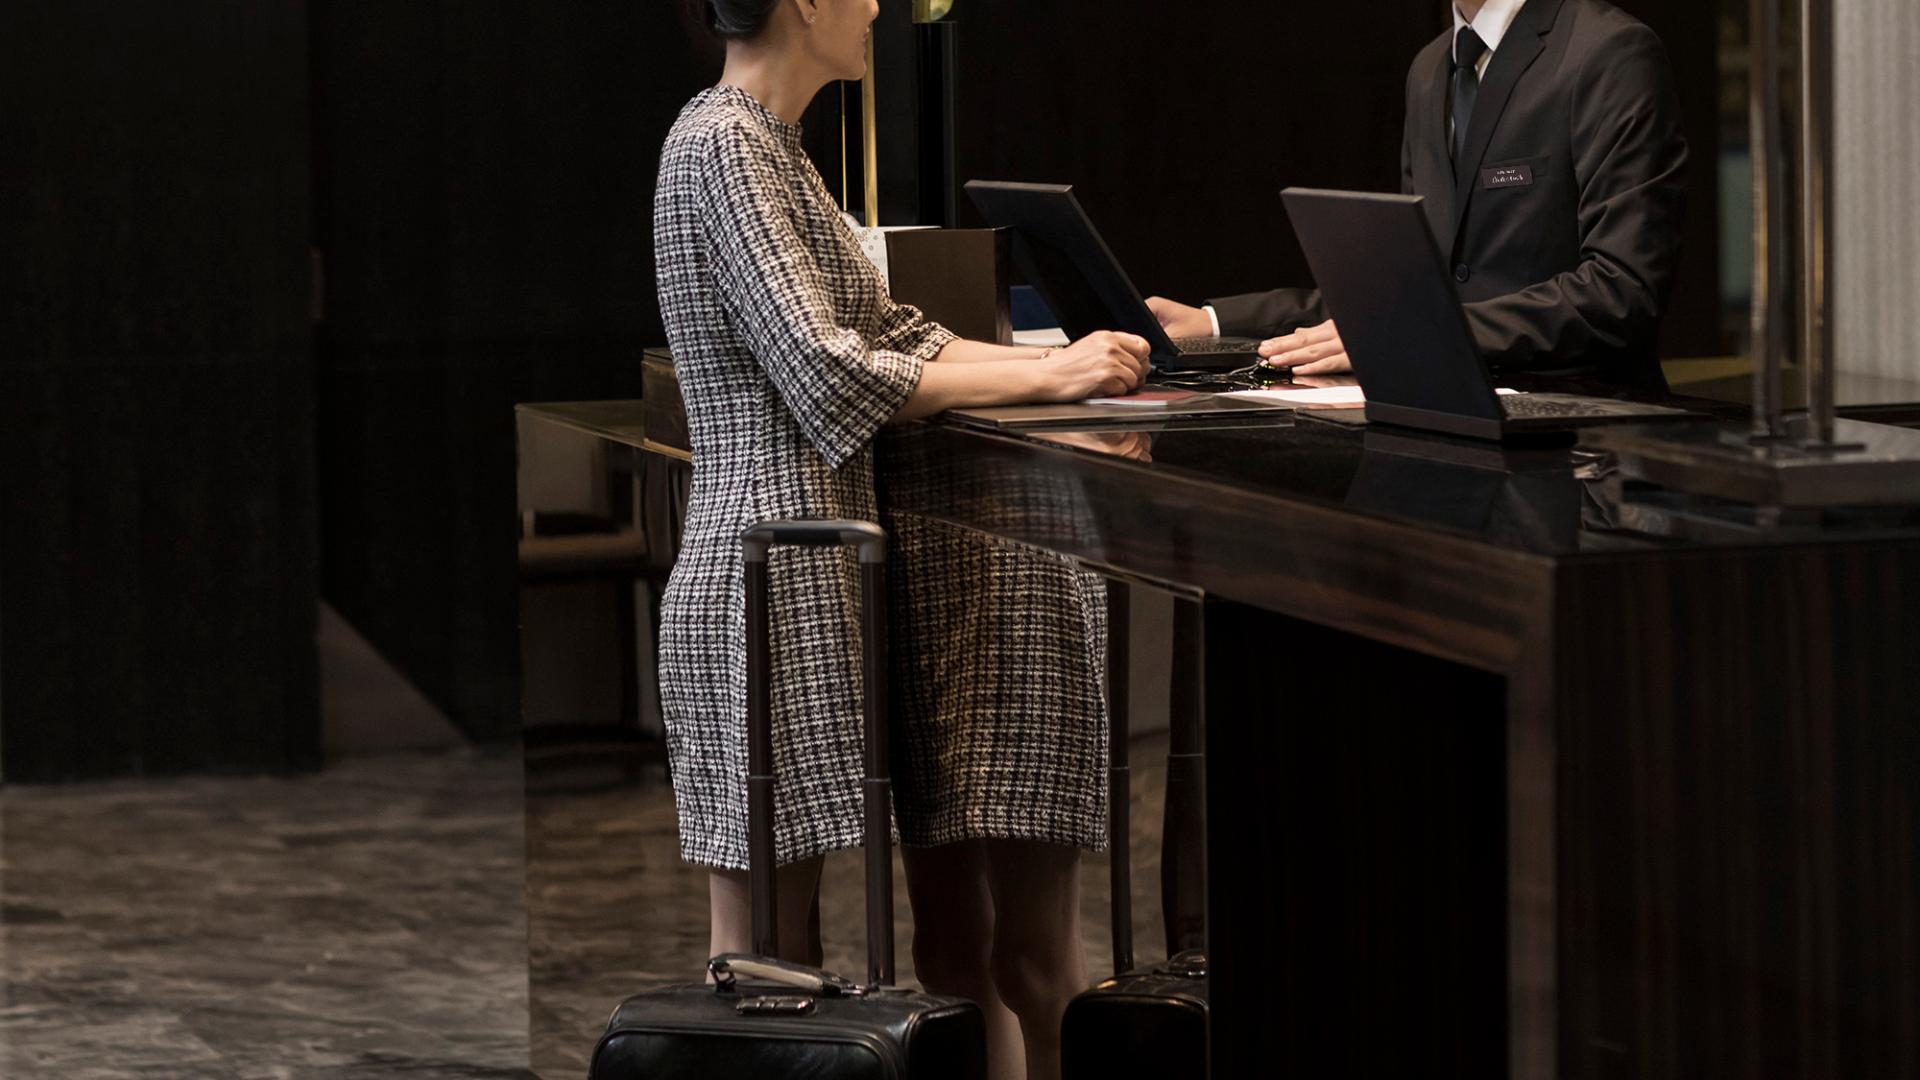 Elegant Chinese woman checking into hotel